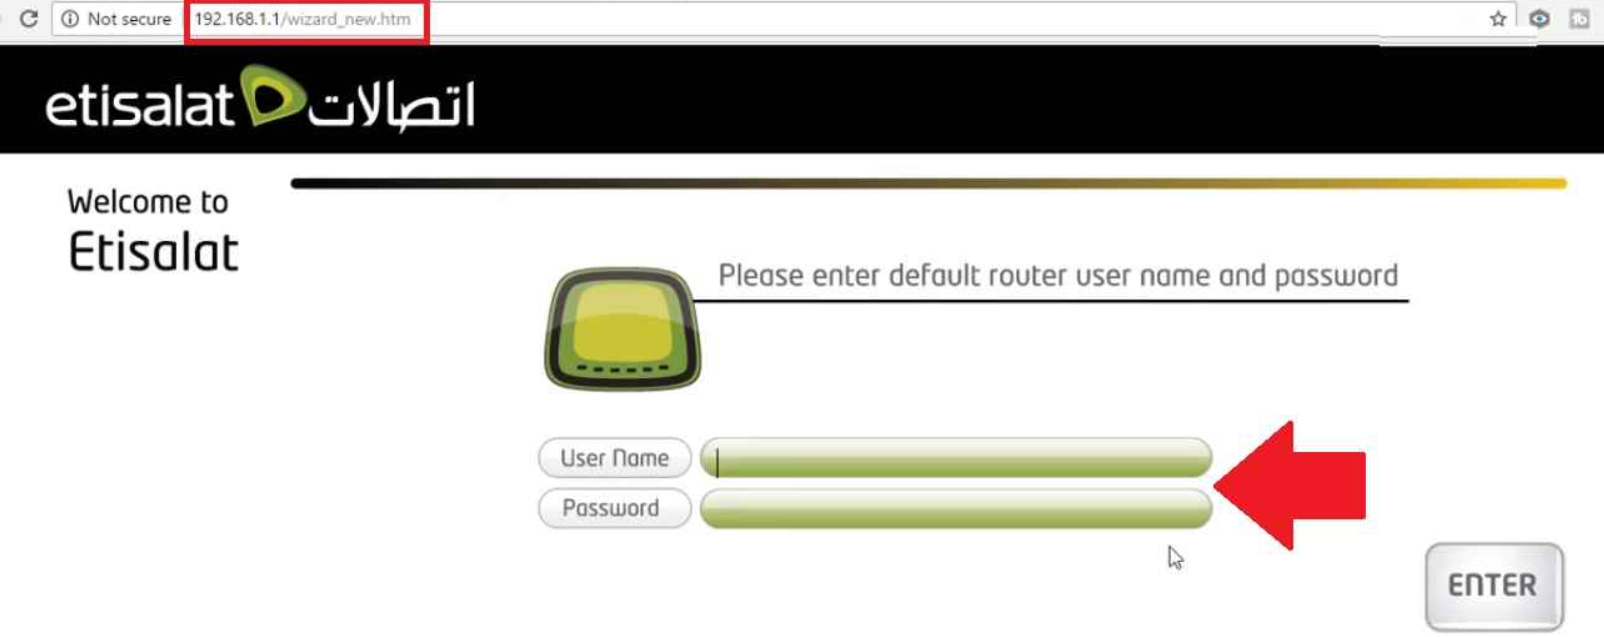 default username and password for etisalat router